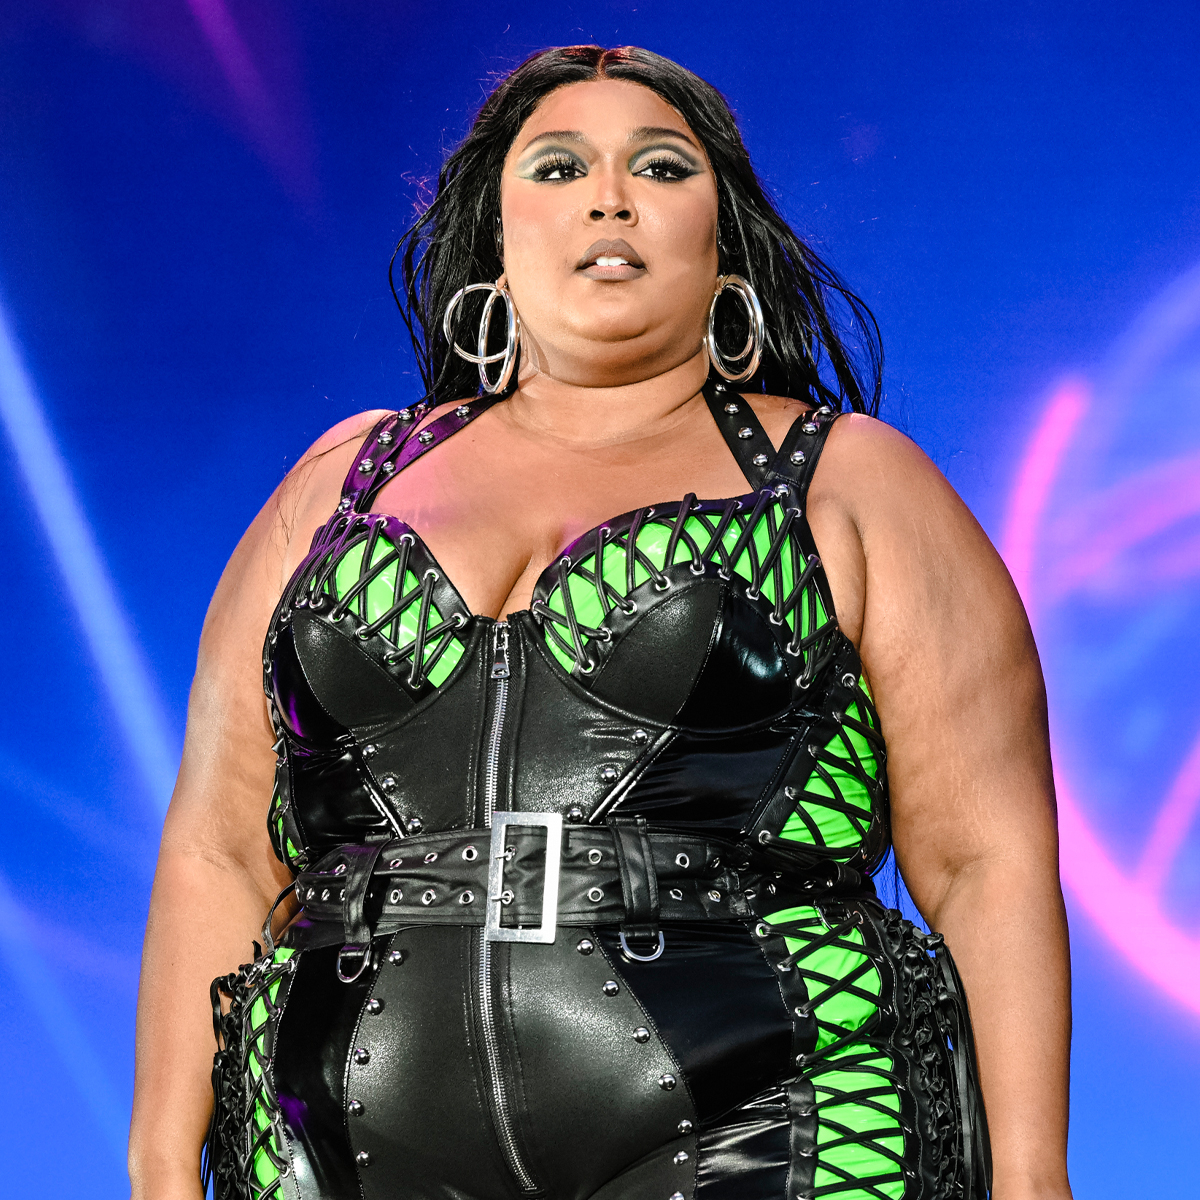 Lizzo News, Pictures, and Videos - E! Online